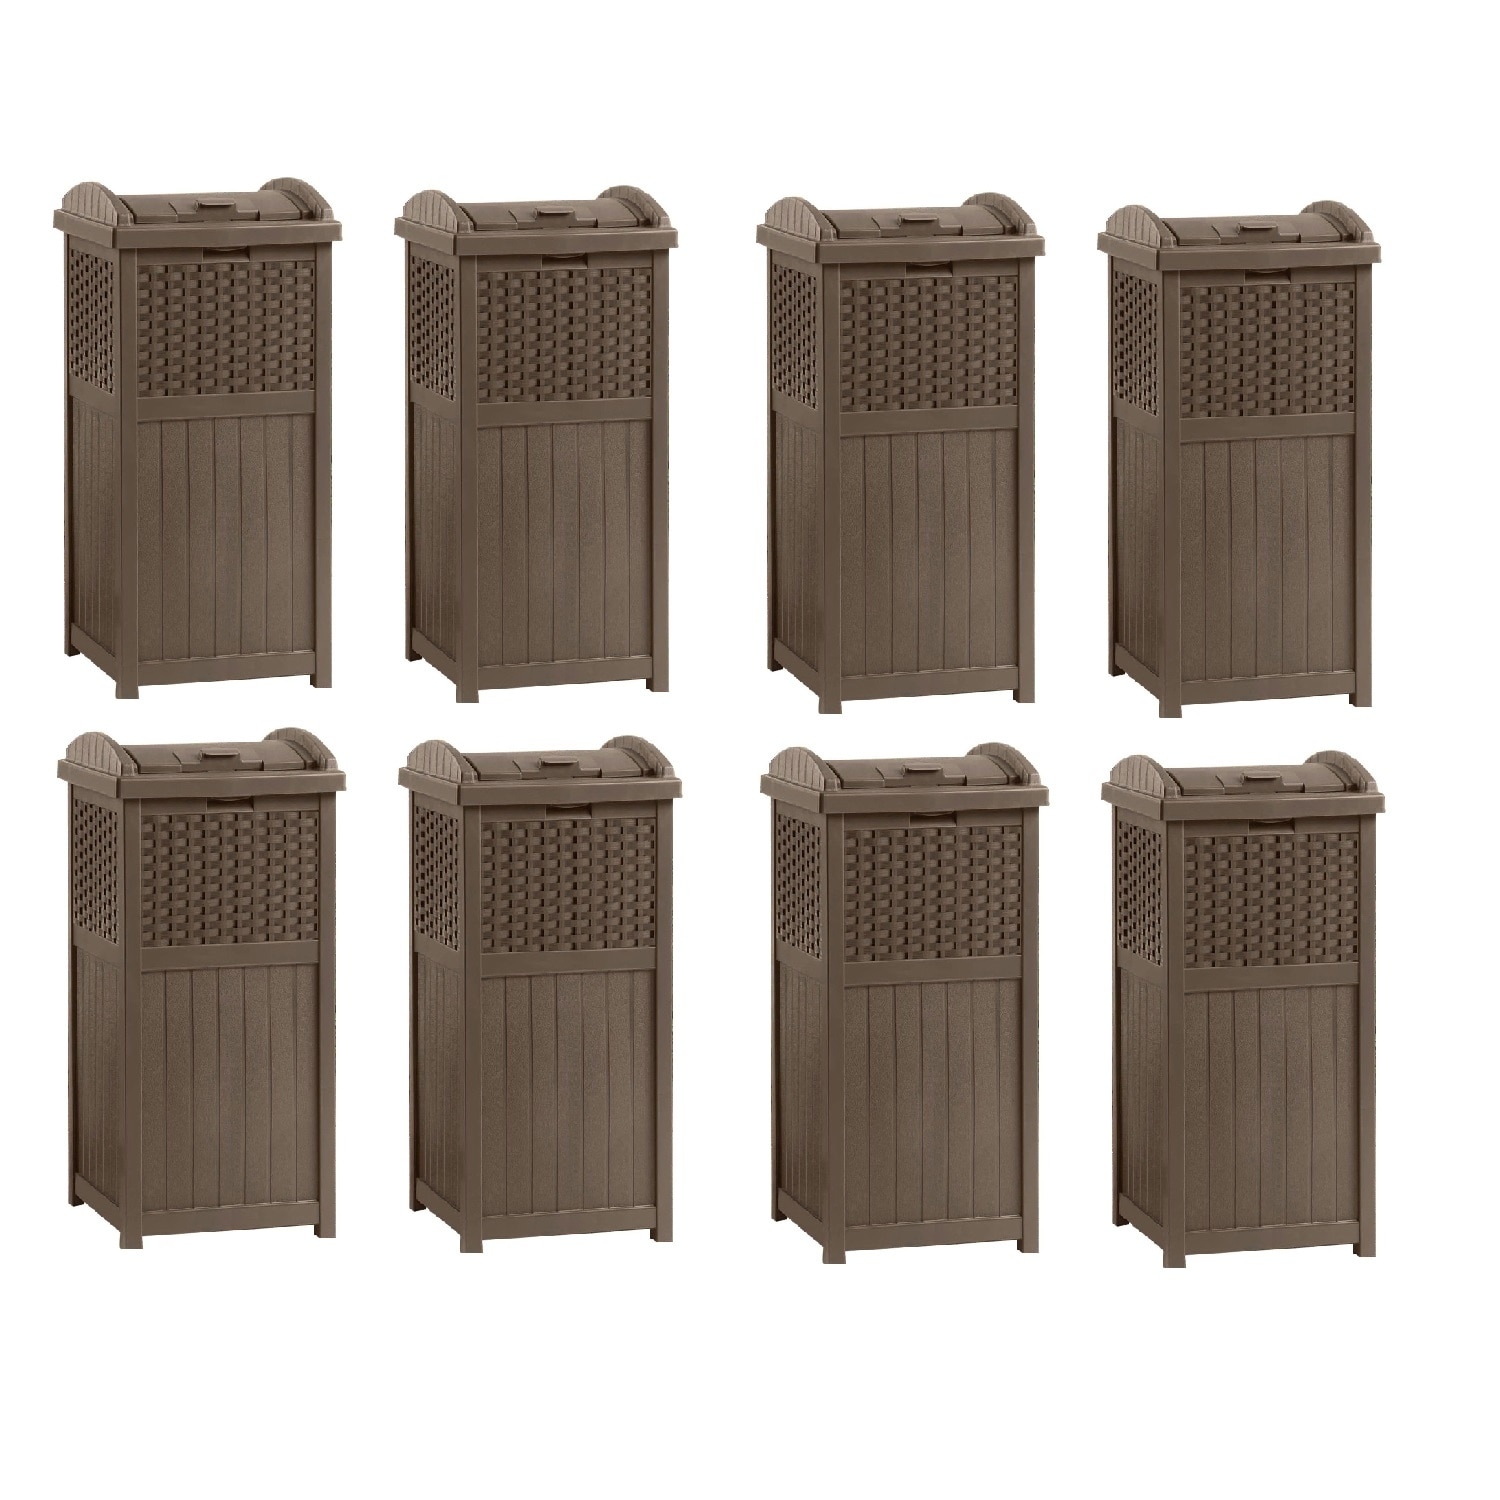 https://ak1.ostkcdn.com/images/products/is/images/direct/de7627d16f3f8beb8ed768533f25012f8edf0805/Suncast-Trash-Hideaway-33-Gallon-Resin-Wicker-Outdoor-Garbage-Container-%288-Pack%29.jpg